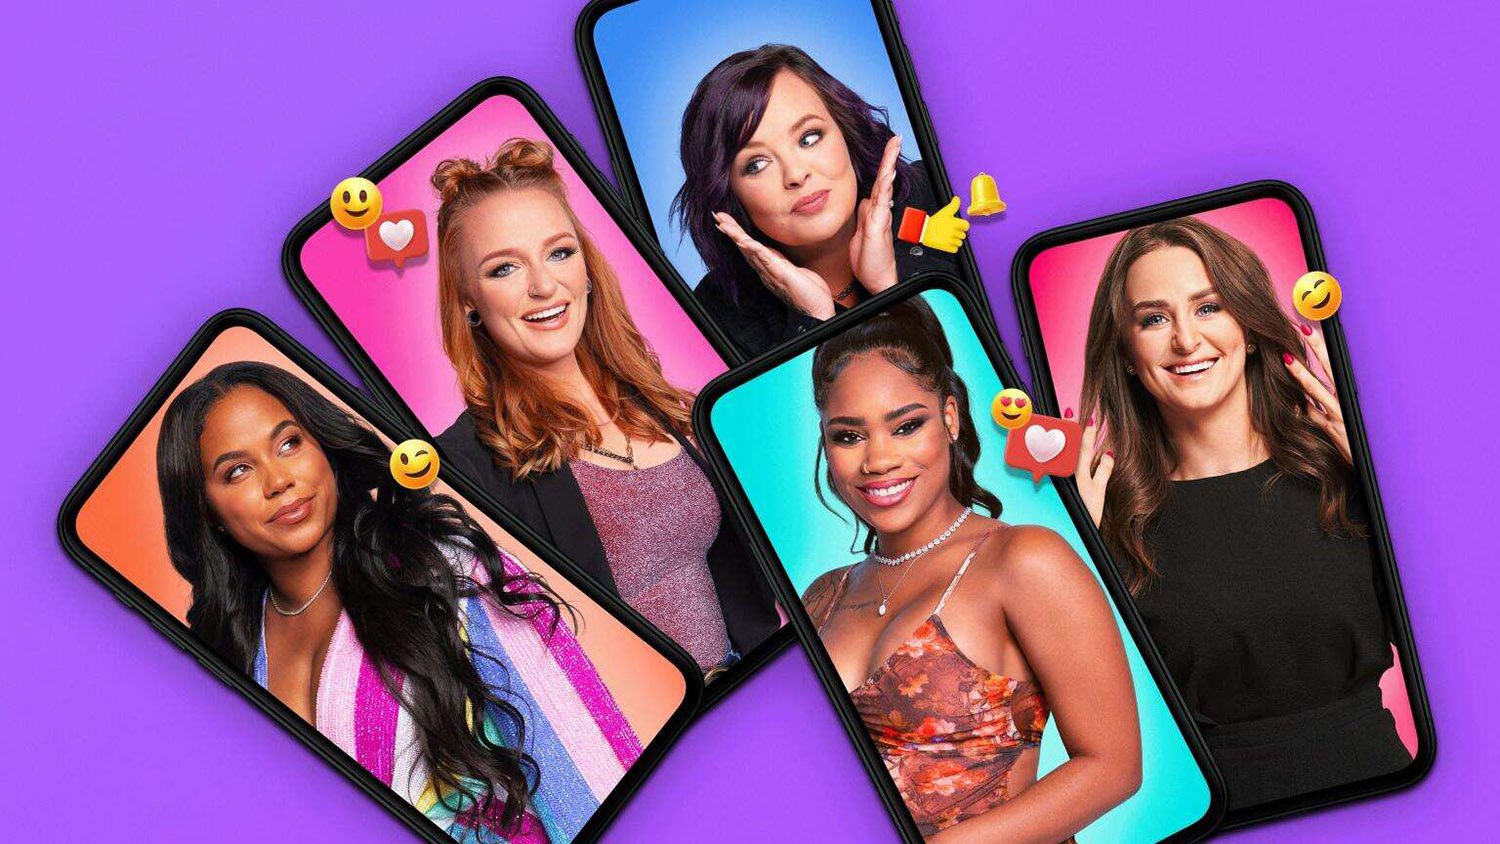 Teen Mom: The Next Chapter artwork shows the cast on phone screens against a purple background